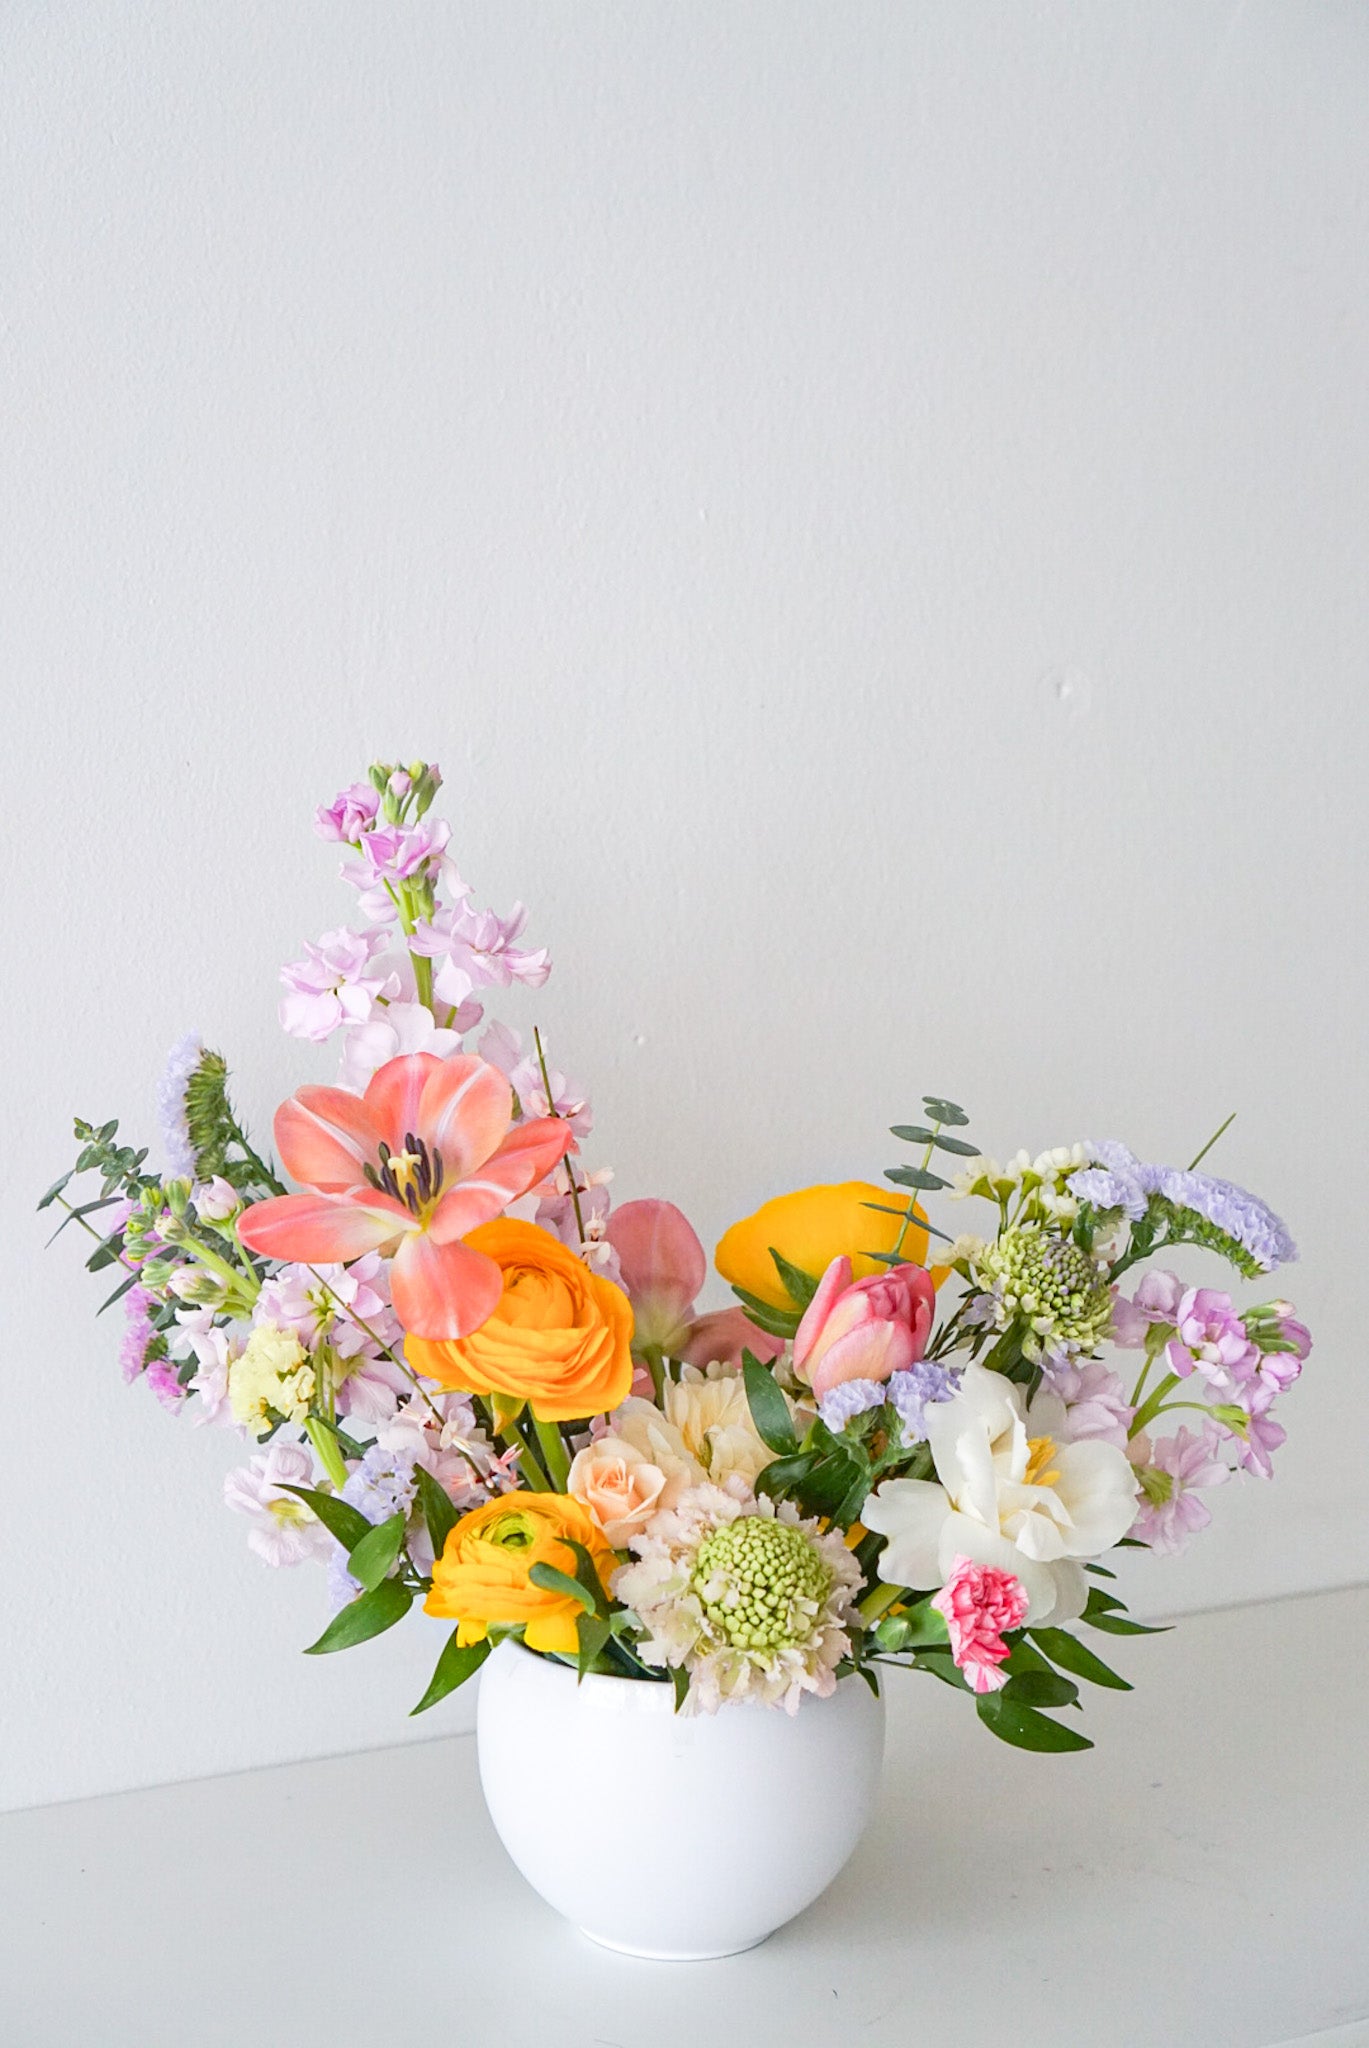 Like a spectacular spring sunrise, this radiant arrangement of yellow, peach, pink blooms, designed in a modern circular pot. This arrangement is sure to brighten anyone's day!  This arrangement features ranunculus, tulips, stocks, scabiosa, statics.